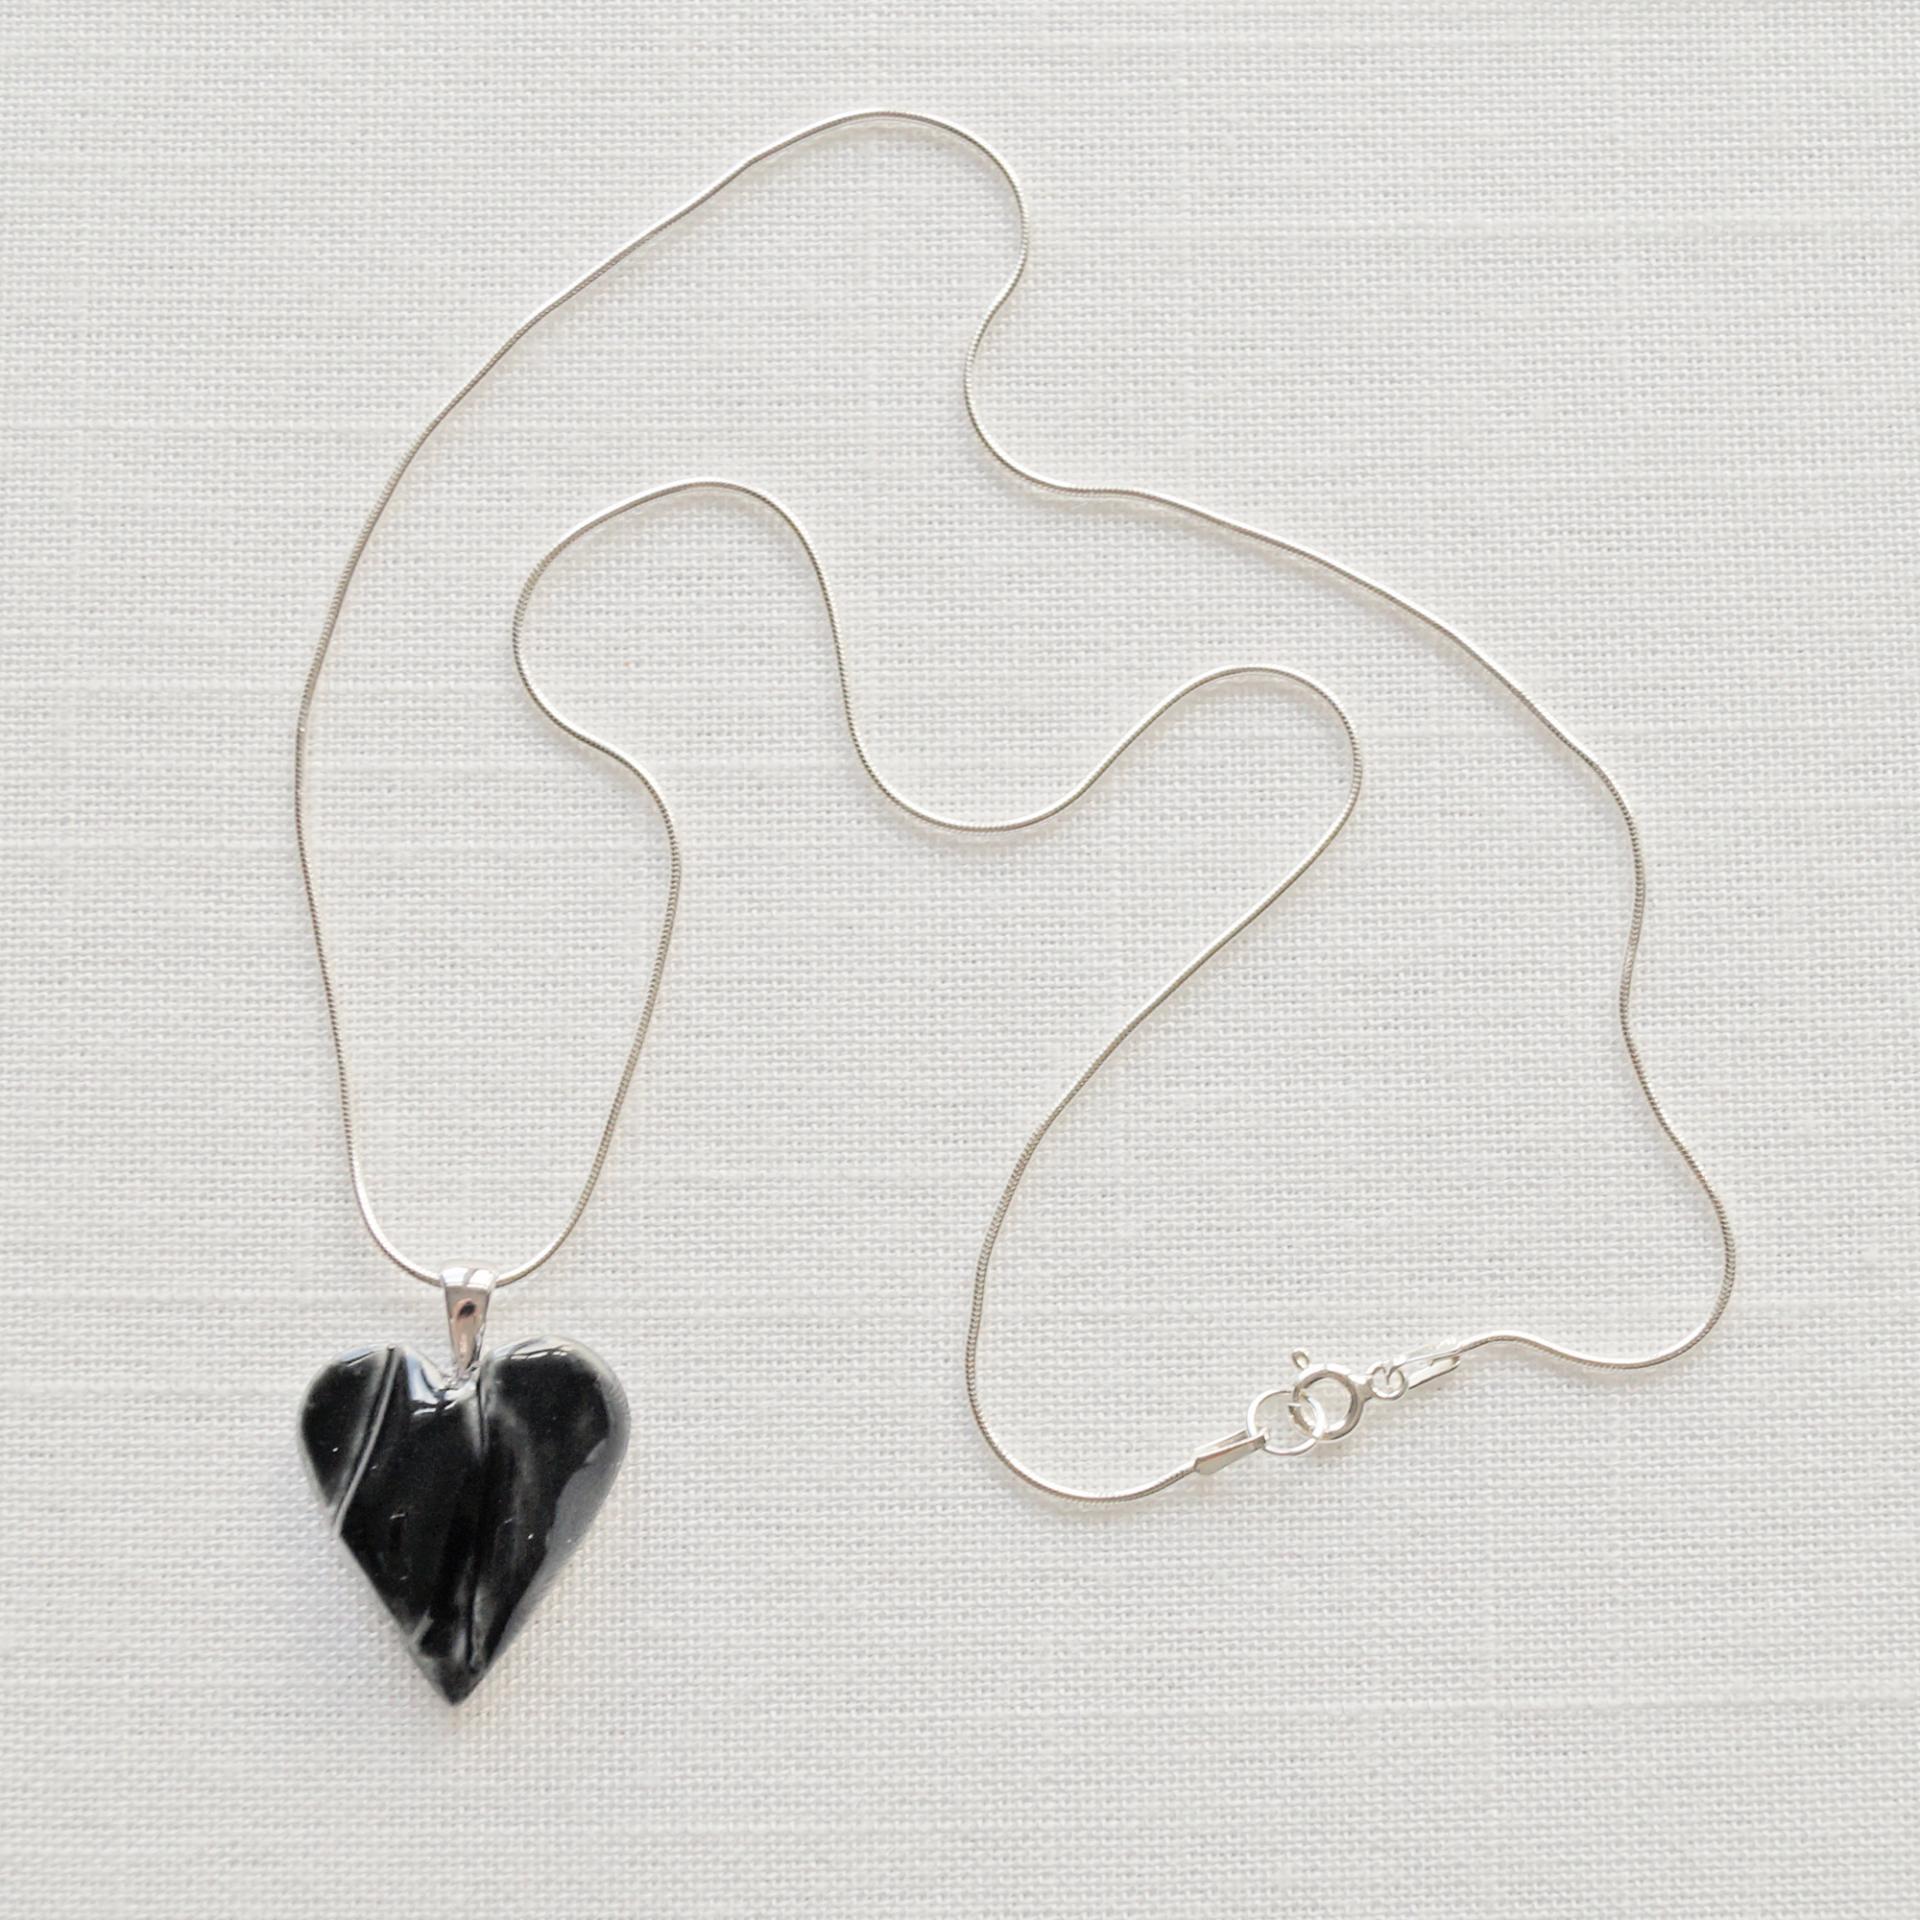 Draped porcelain HEART necklace, small black heart necklace, black bride necklace, 925 sterling silver snake chain, 18th porc